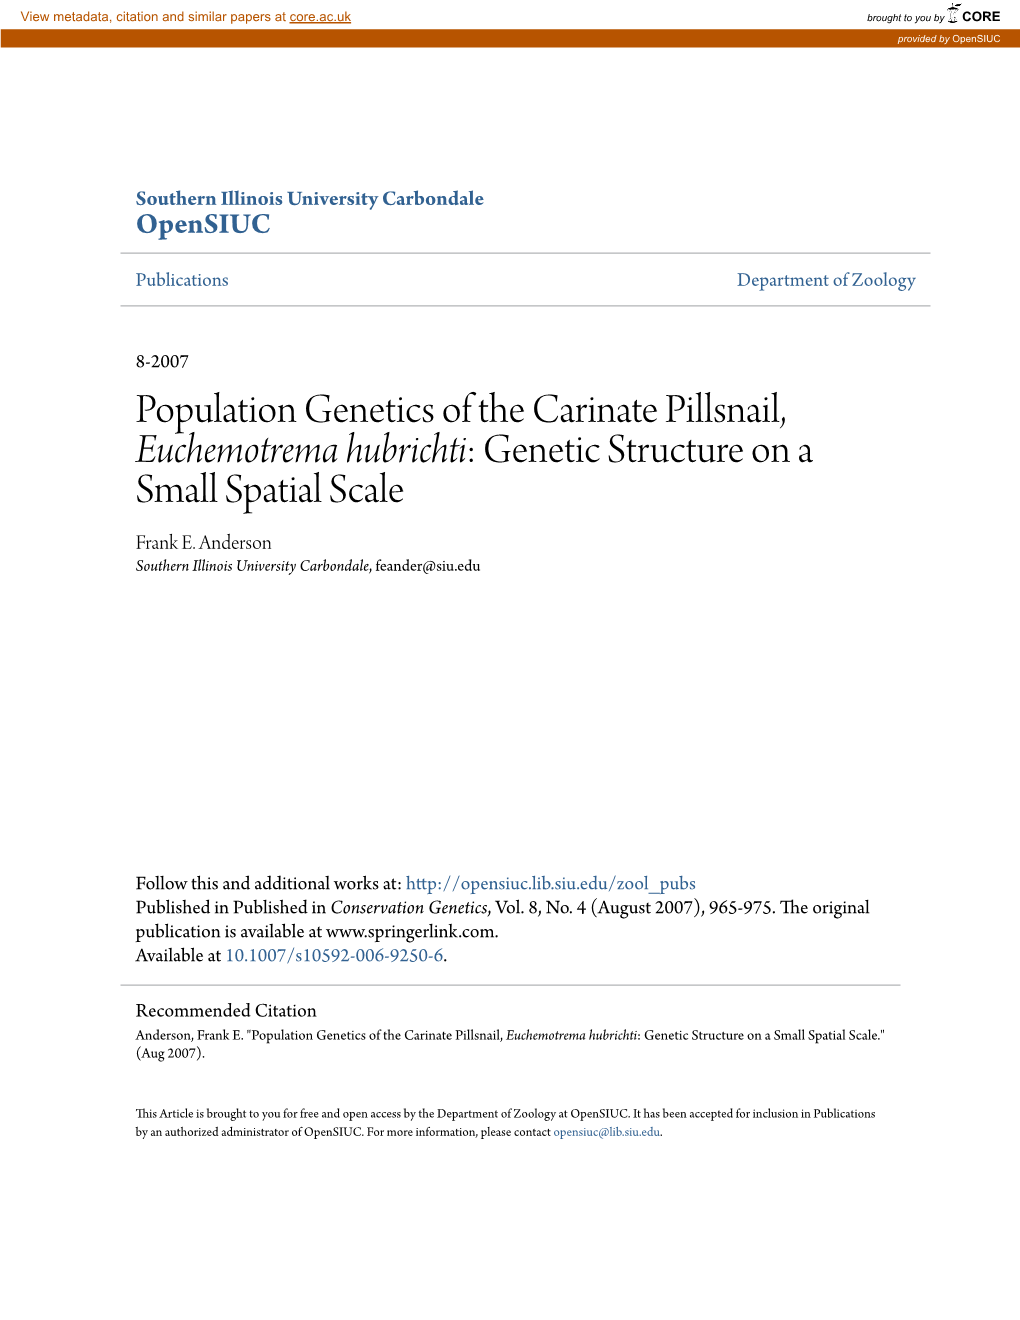 Population Genetics of the Carinate Pillsnail, Euchemotrema Hubrichti: Genetic Structure on a Small Spatial Scale Frank E